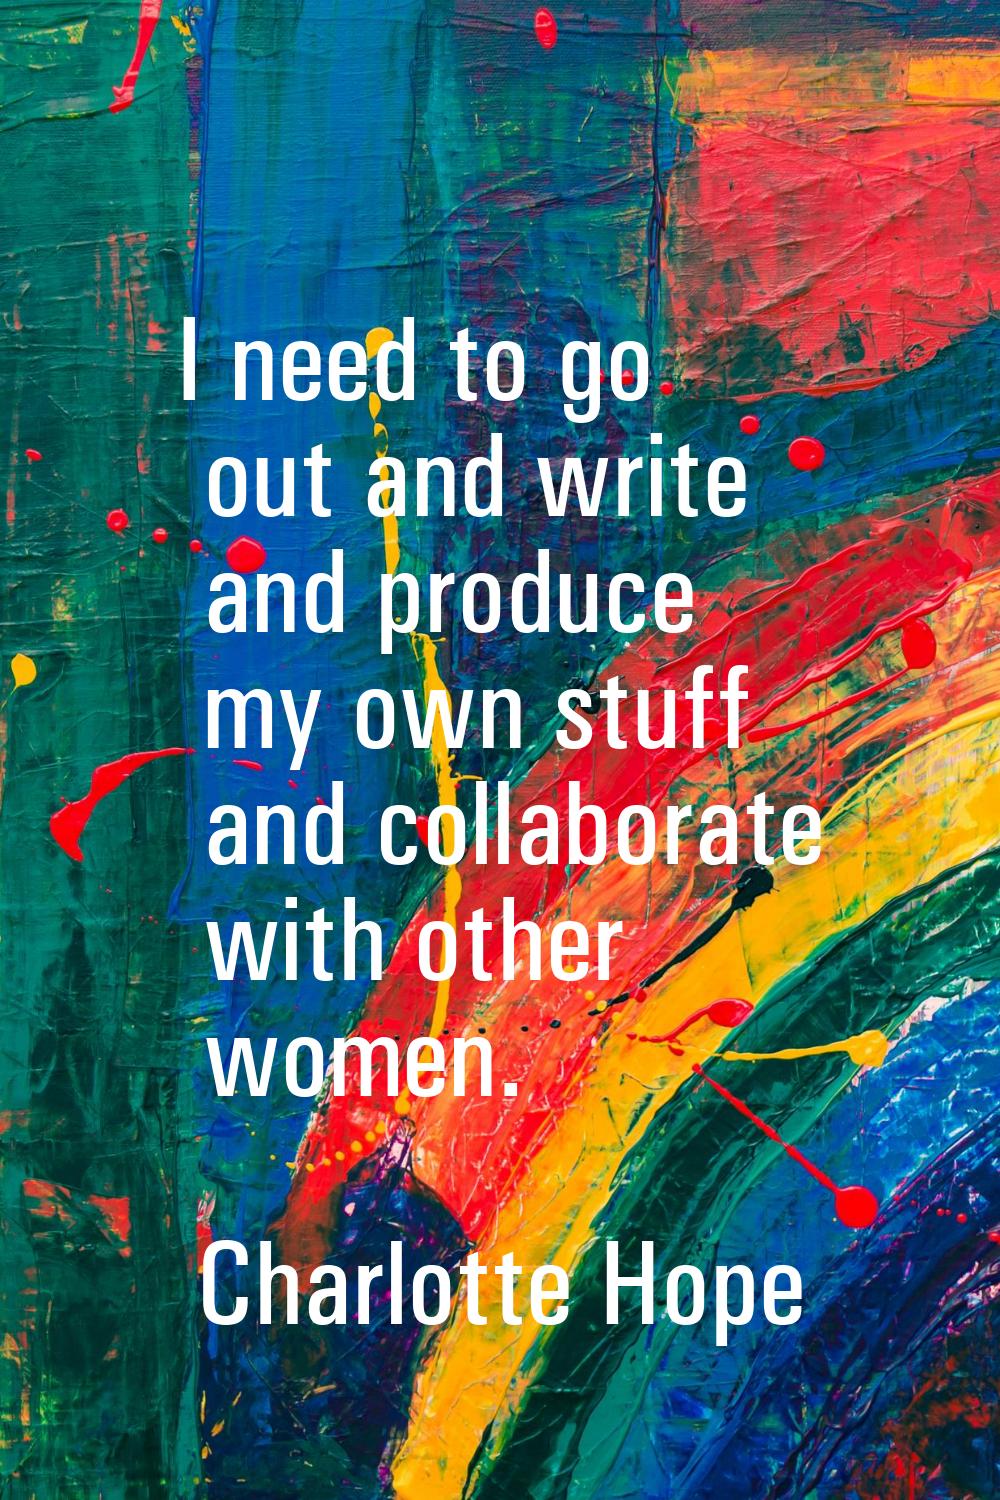 I need to go out and write and produce my own stuff and collaborate with other women.